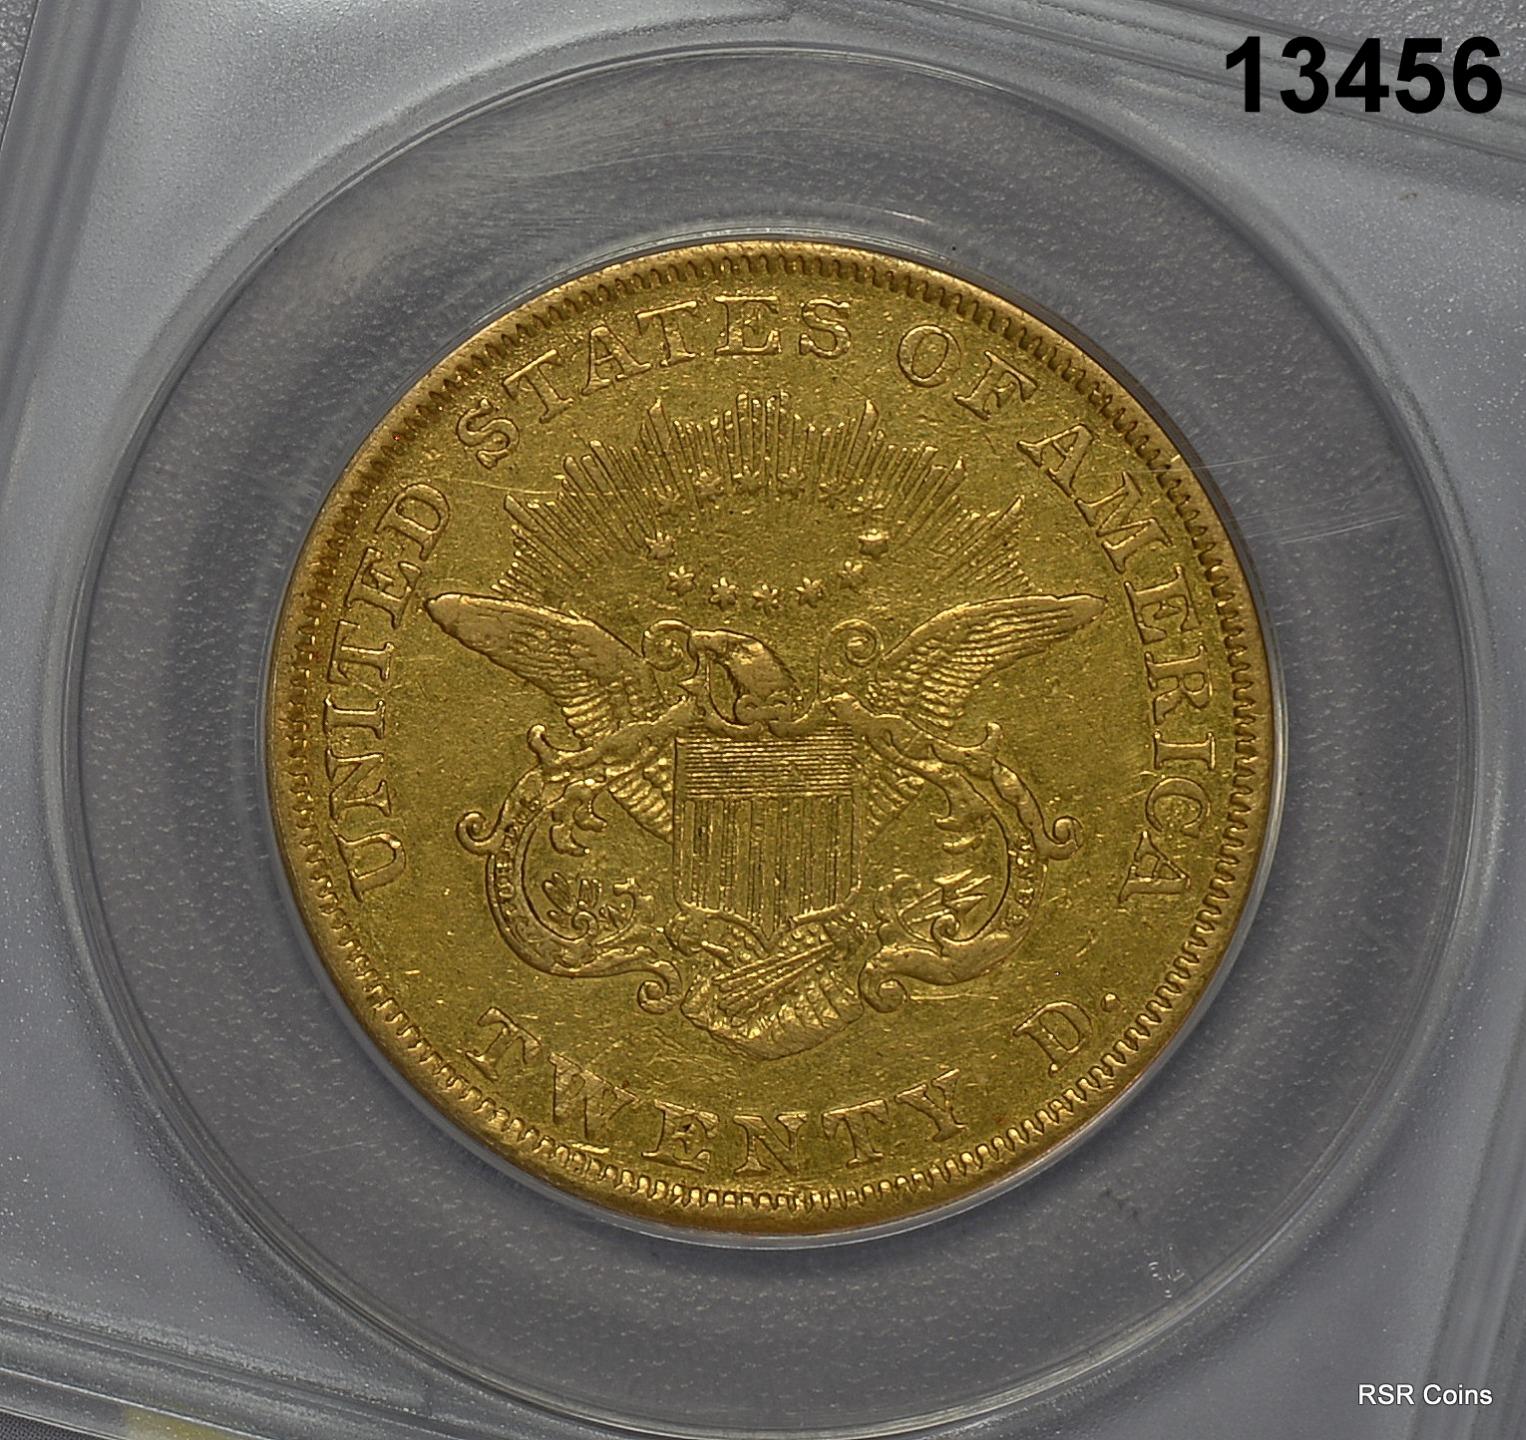 1850 $20 GOLD DOUBLE EAGLE RARE! ANACS CERTIFIED EF45 CLEANED #13456